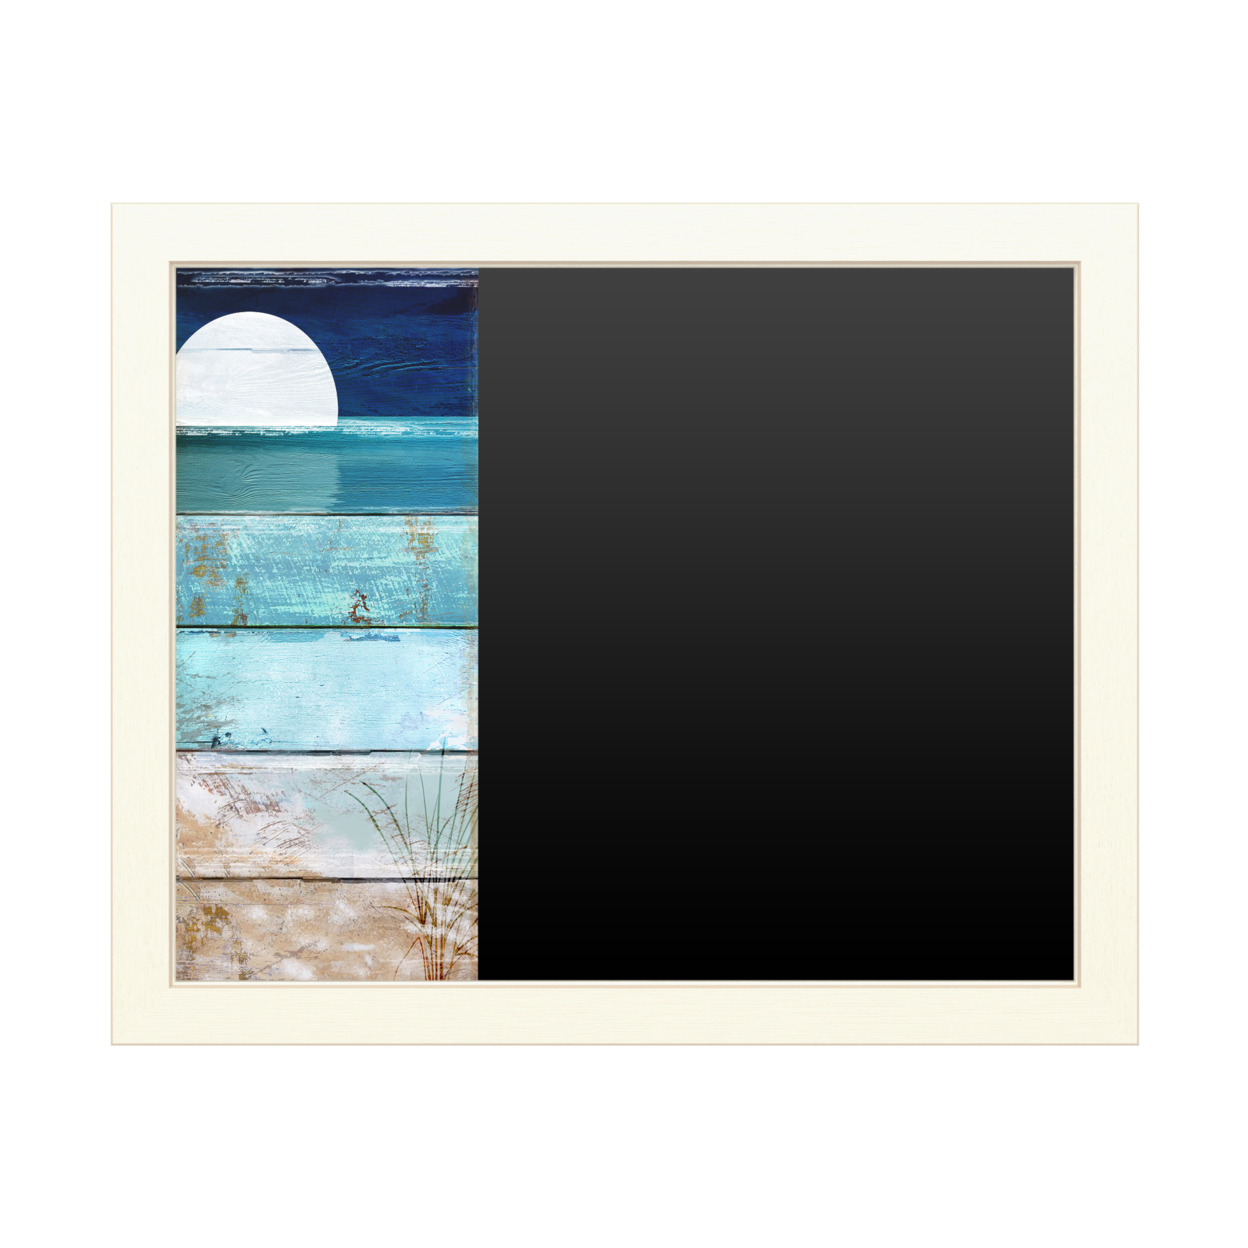 16 X 20 Chalk Board With Printed Artwork - Color Bakery Beach Moonrise I White Board - Ready To Hang Chalkboard